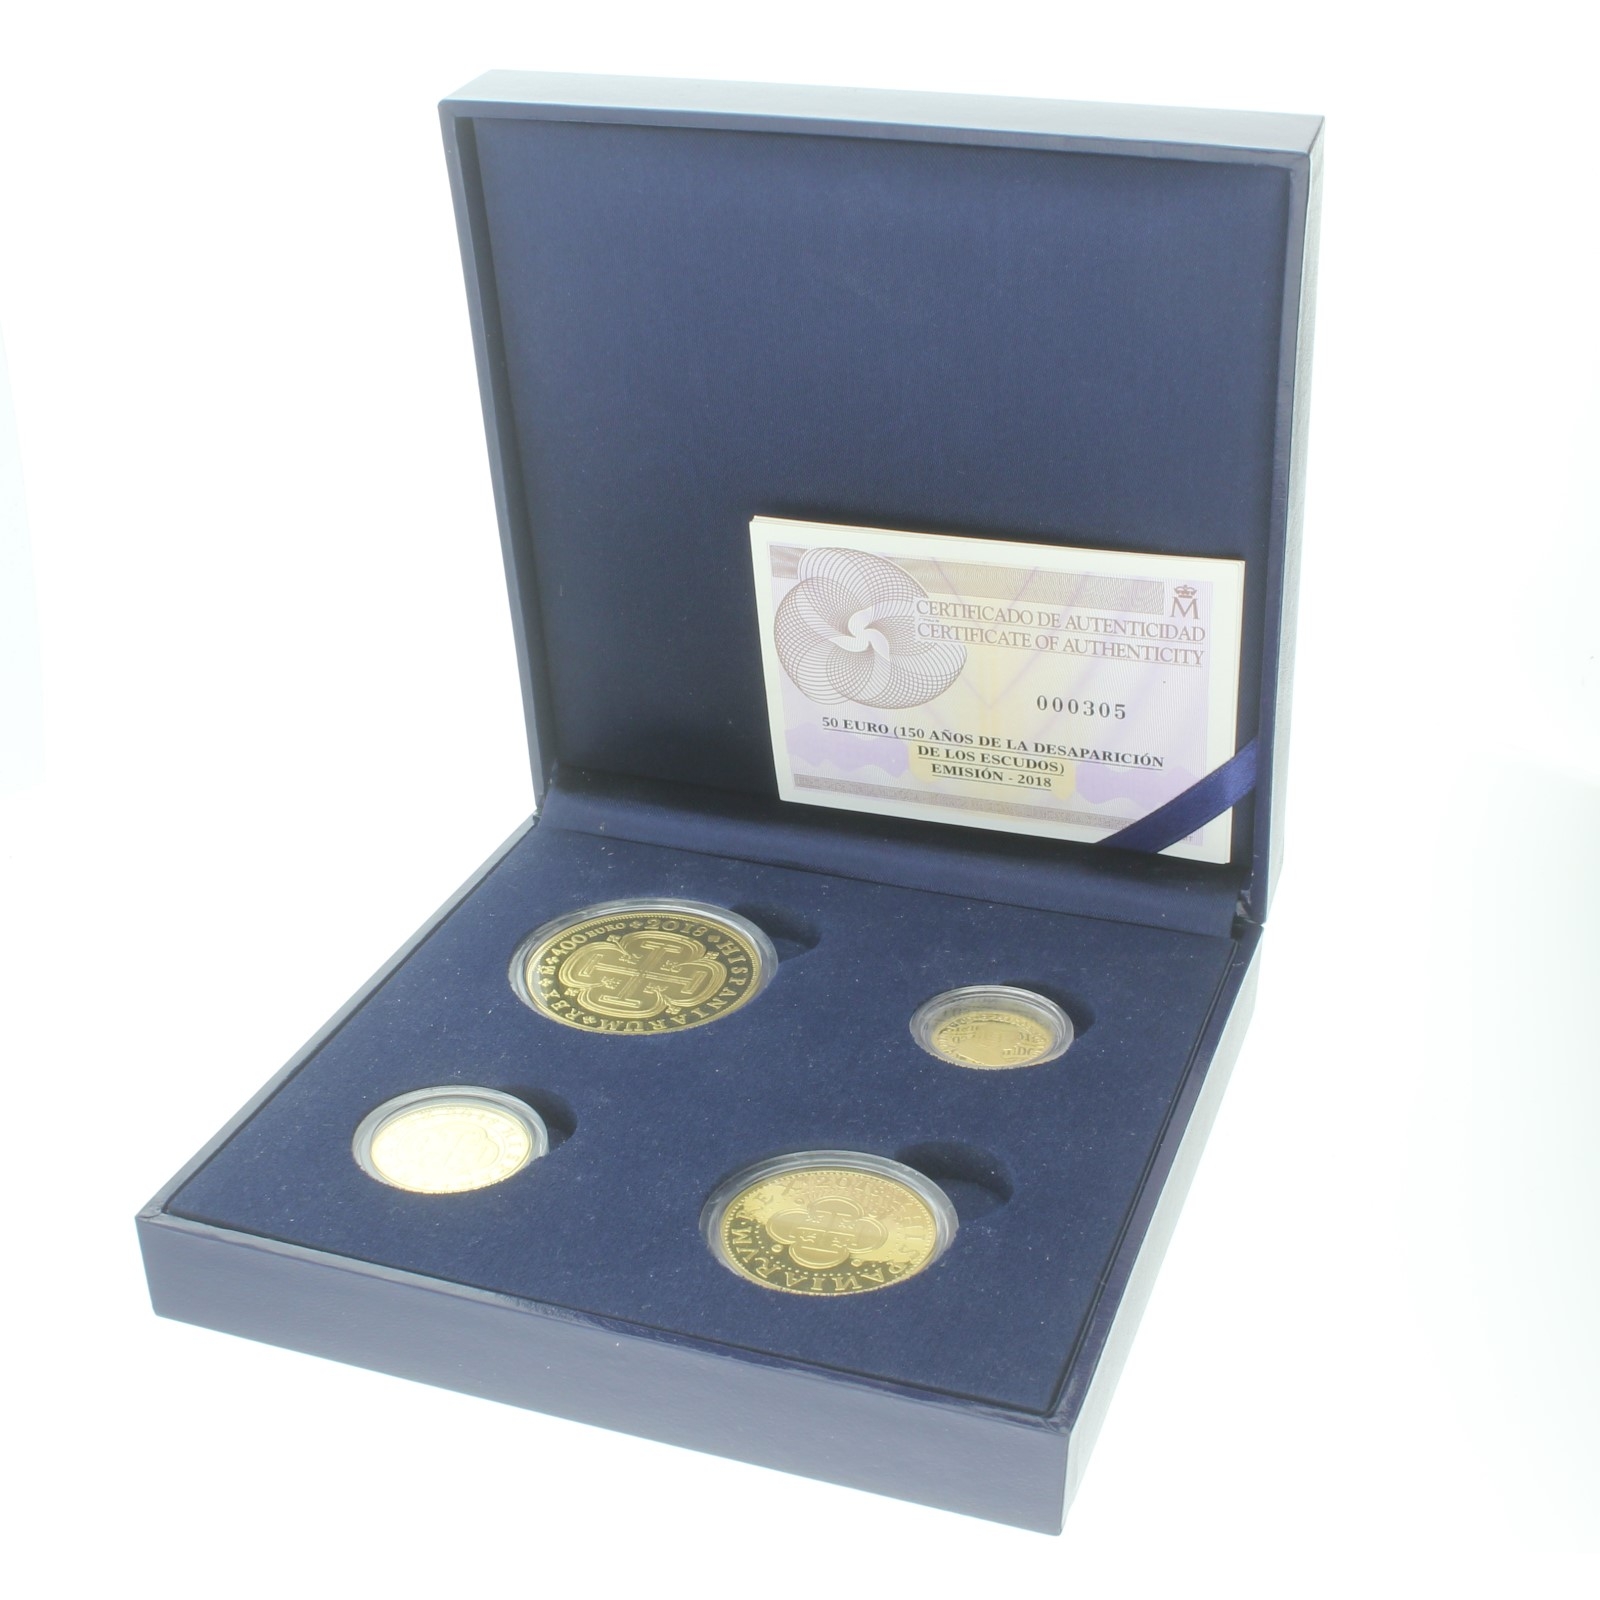 Portugal - 50-400 euros - 2018 - Gold proof set - 150th anniversary of the last escudo coin